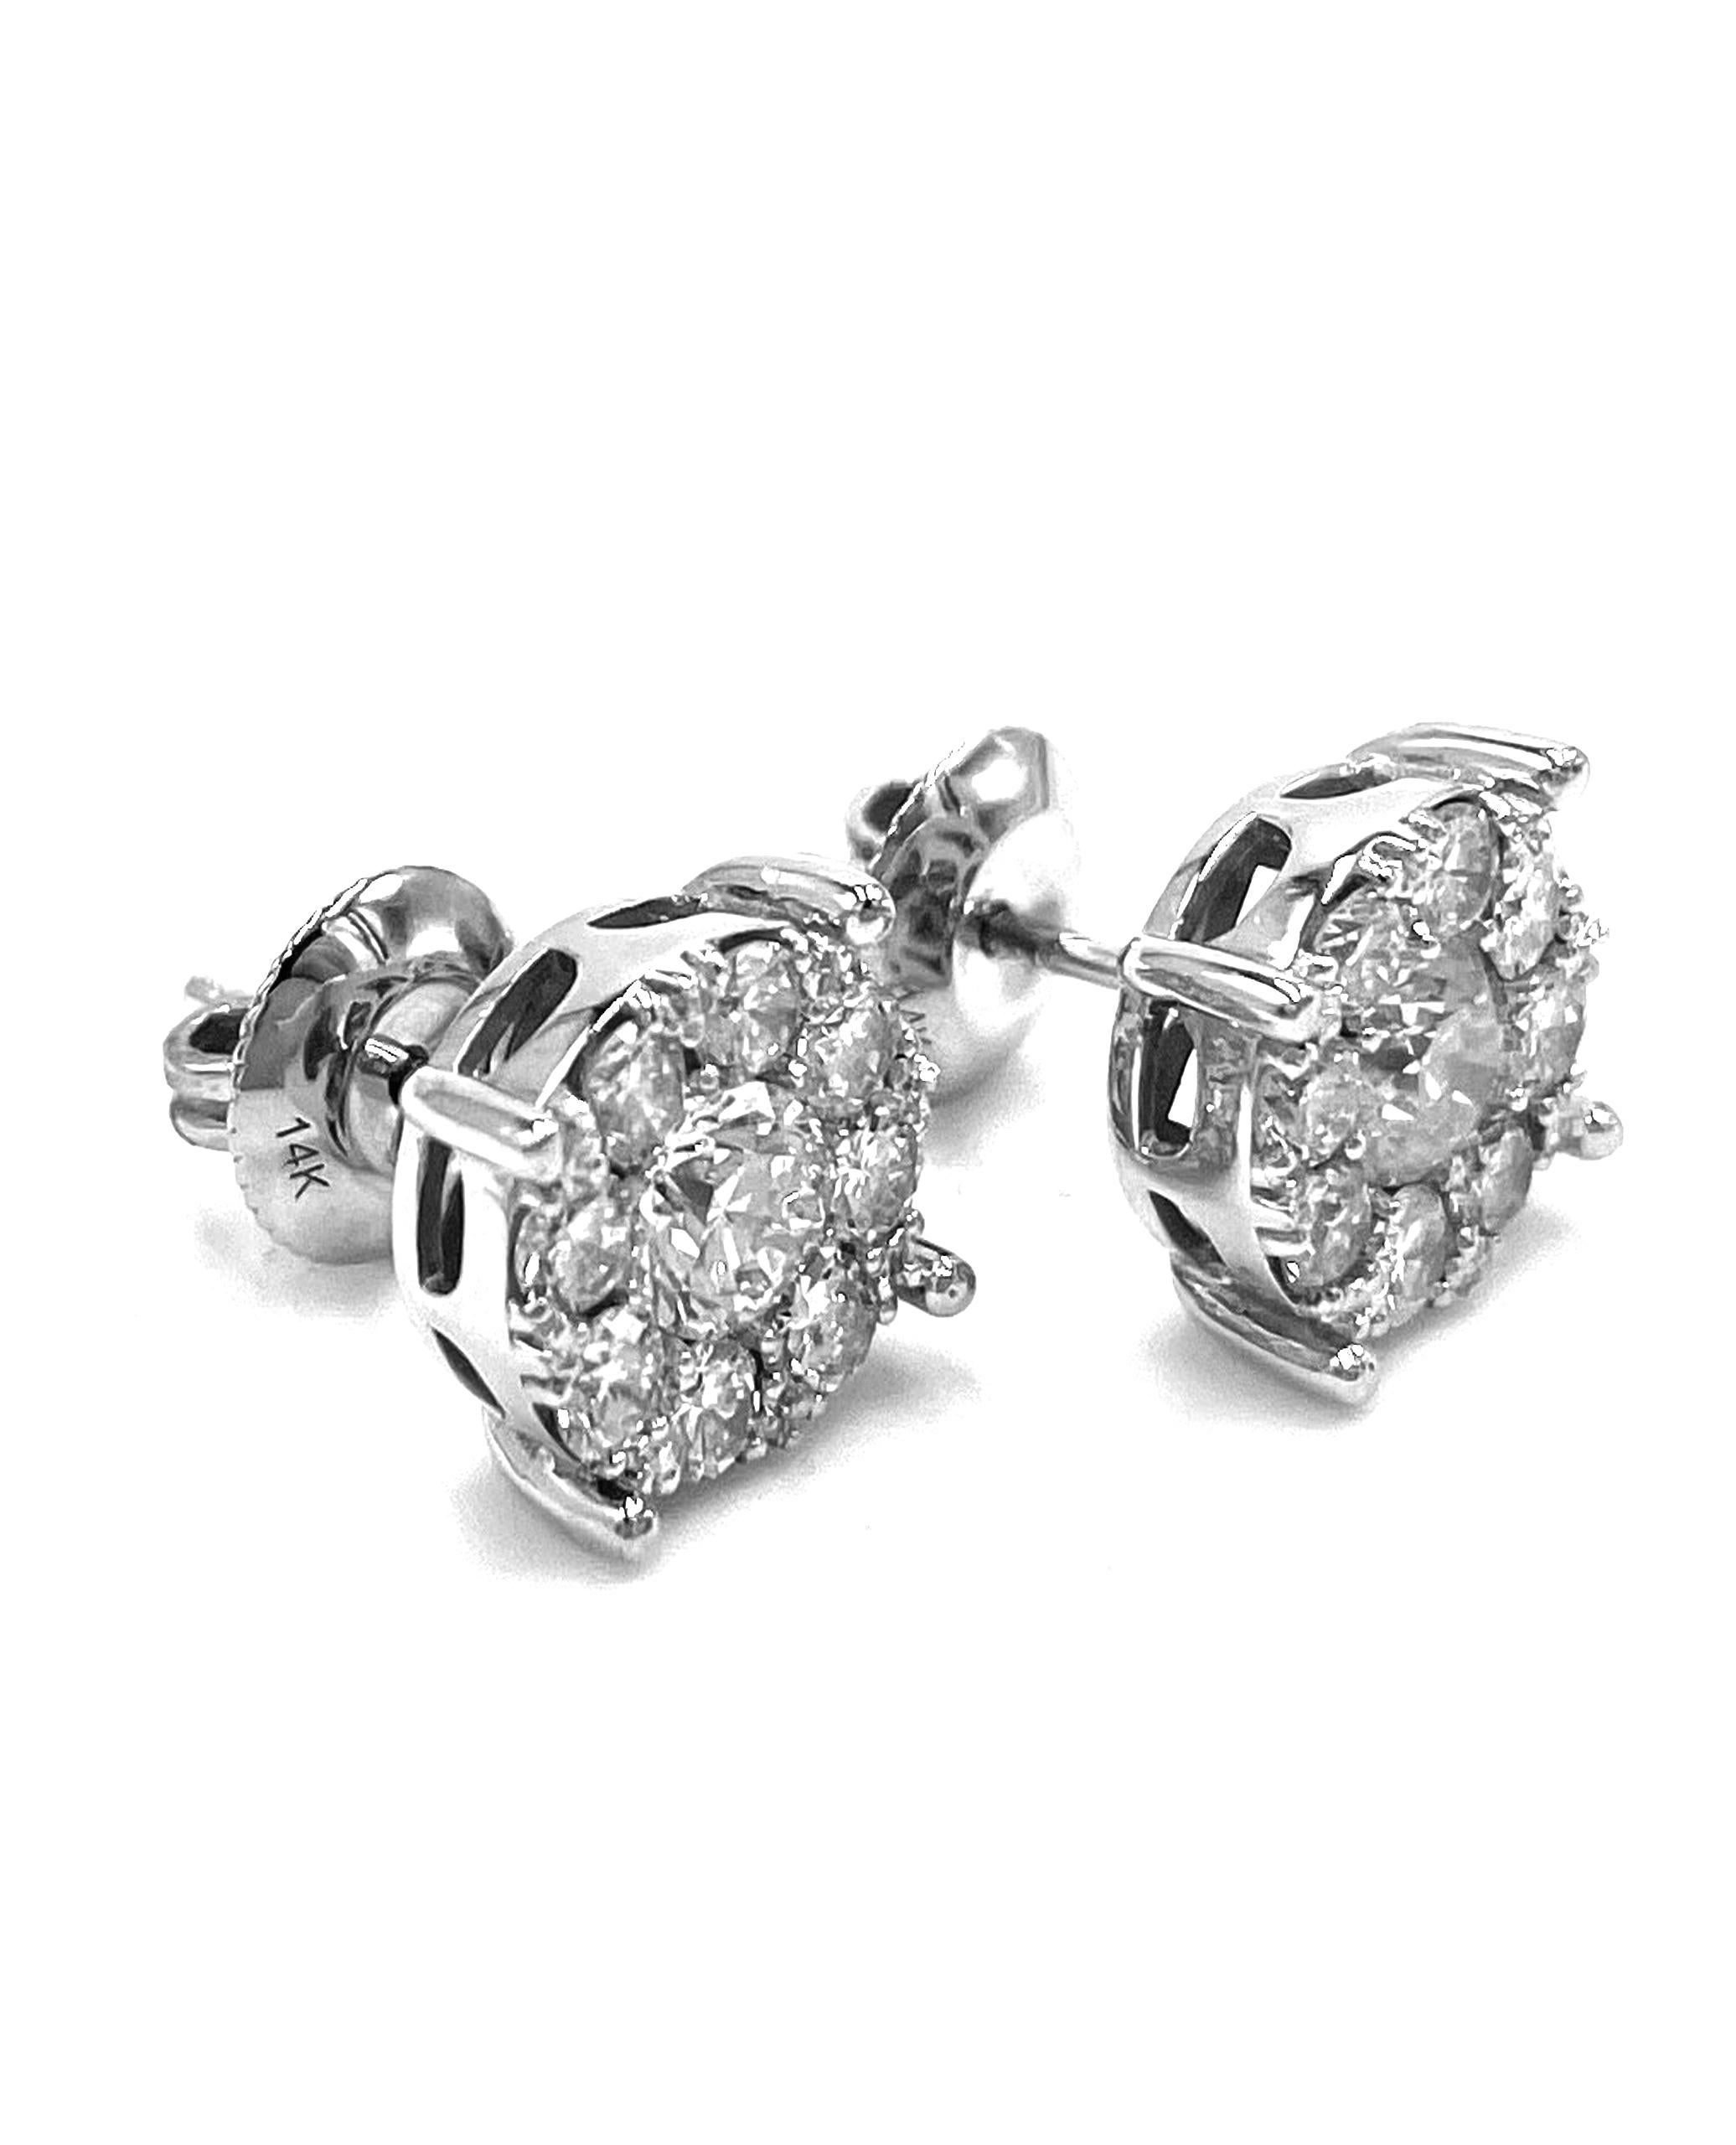 Pair of 14K white gold cluster stud earrings with 16 round, brilliant-cut diamonds 0.96 carat total weight and two round, brilliant-cut center diamonds 0.73 carat total weight.

* Diamonds are G/H color, VS2/SI1 clarity.
* Push back closure.
